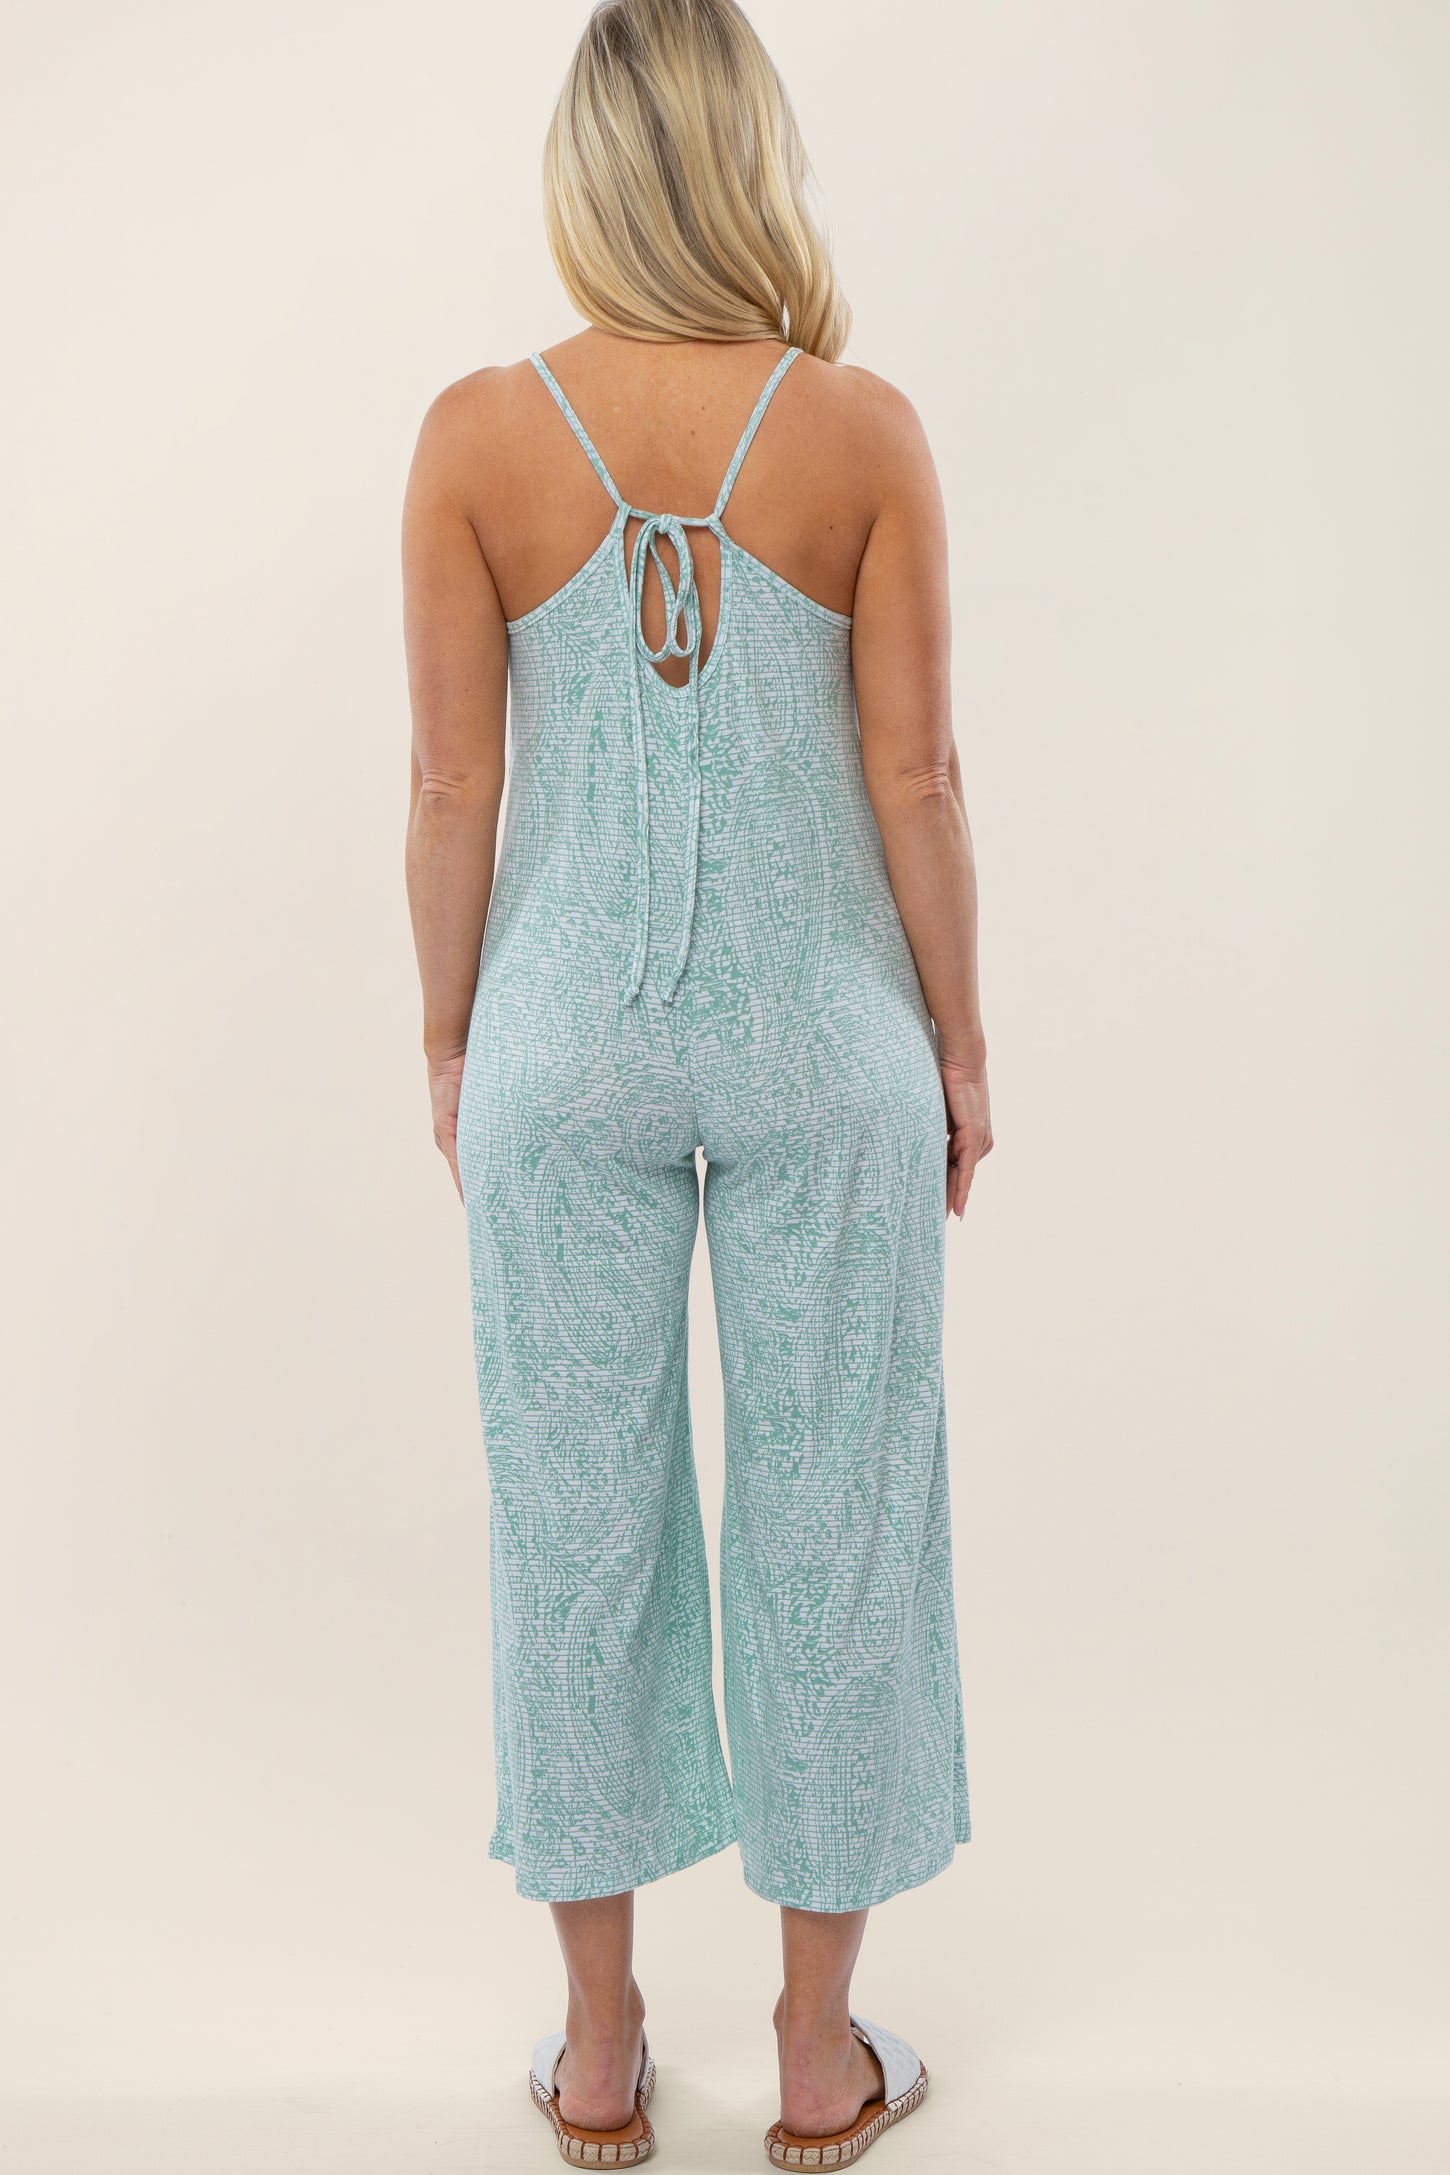 Mint Green Printed Cropped Tie Back Maternity Jumpsuit